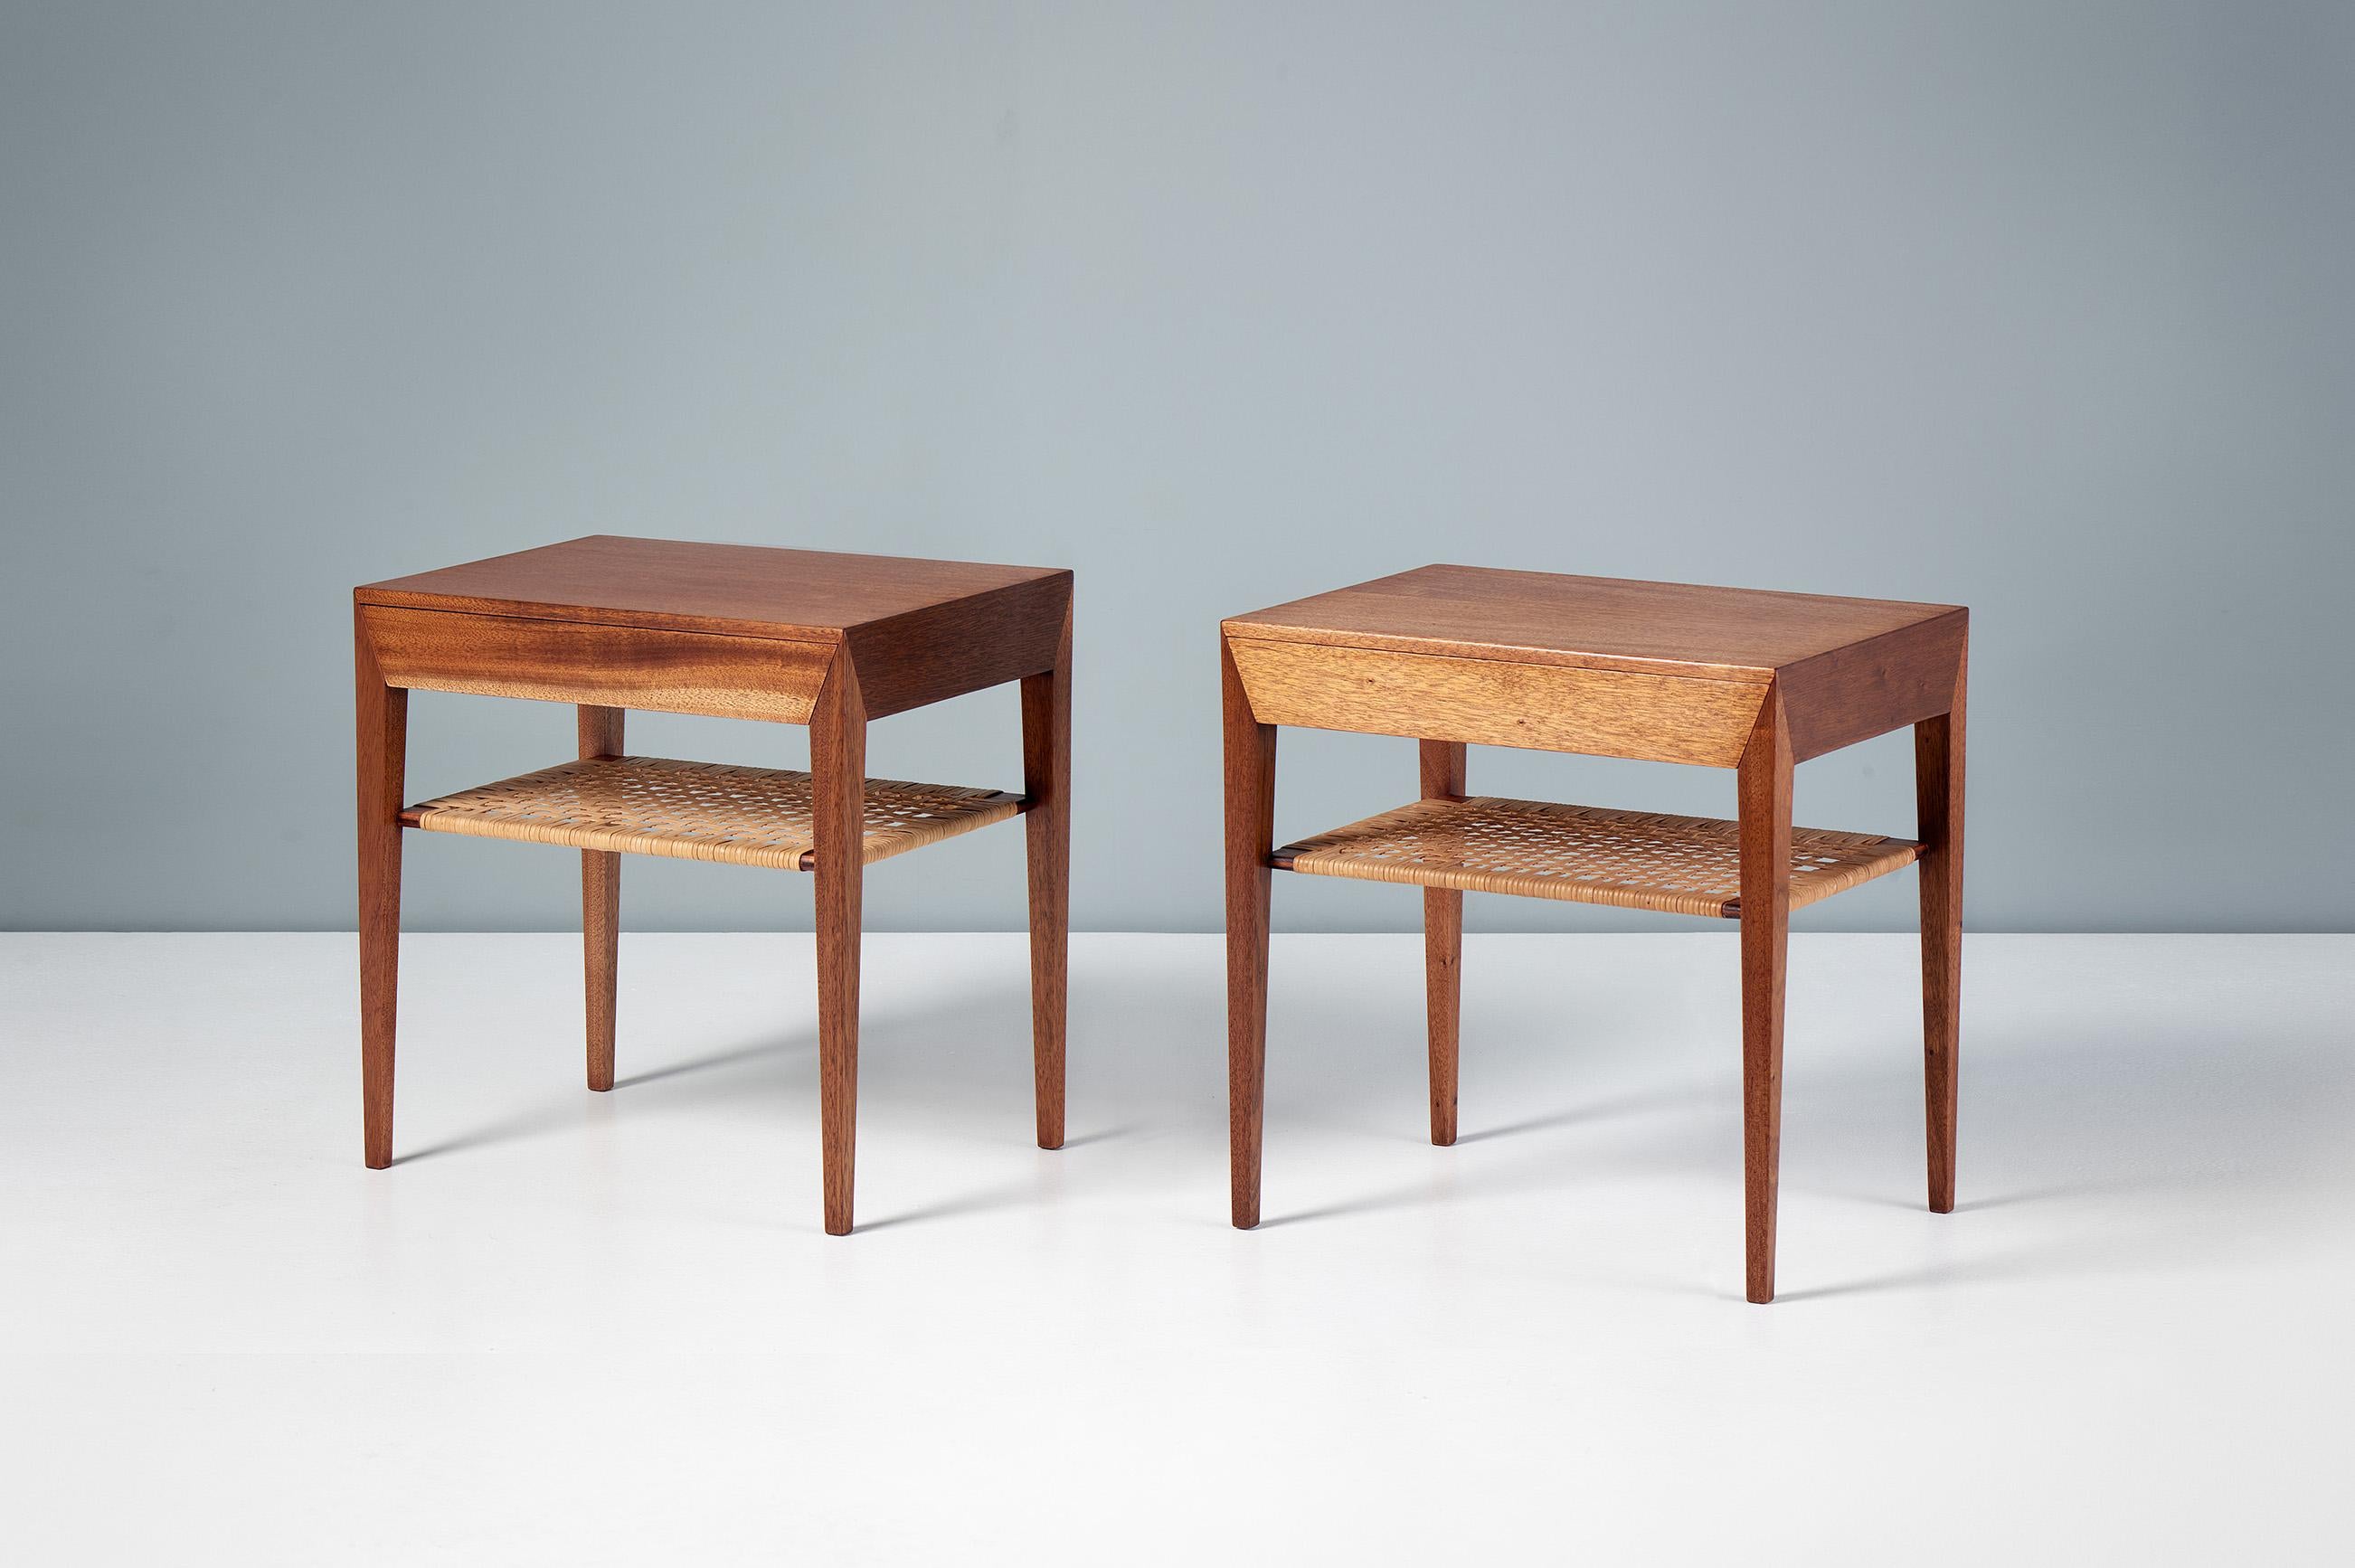 Severin Hansen - Pair of Mahogany Nightstands, c1950s.

Pair of bedside tables with single, birch-lined slim drawers and original woven rattan cane shelves below. Produced by Haslev Mobelsnedkeri, Denmark in rich African mahogany veneer with solid